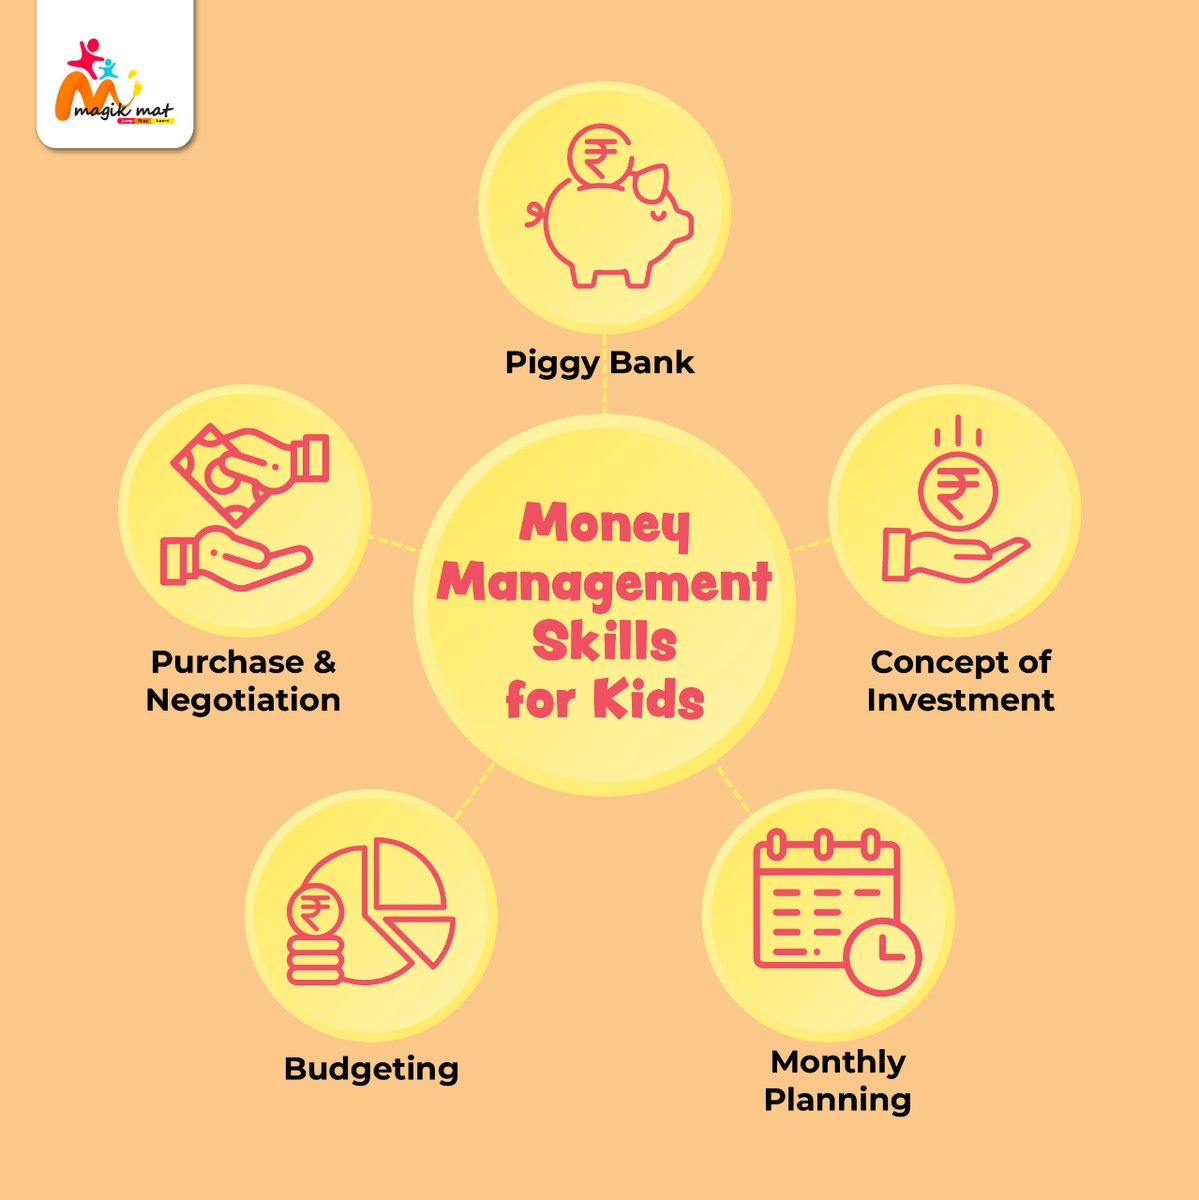 Level up your kid's money management skills! Teach them essential skills like saving, budgeting, and even negotiation. Make them little money masters!

#Magikmat #learningthroughplay #PlayfulLearning #playinggames #highschool #LearningThroughPlay #PlayBasedLearning